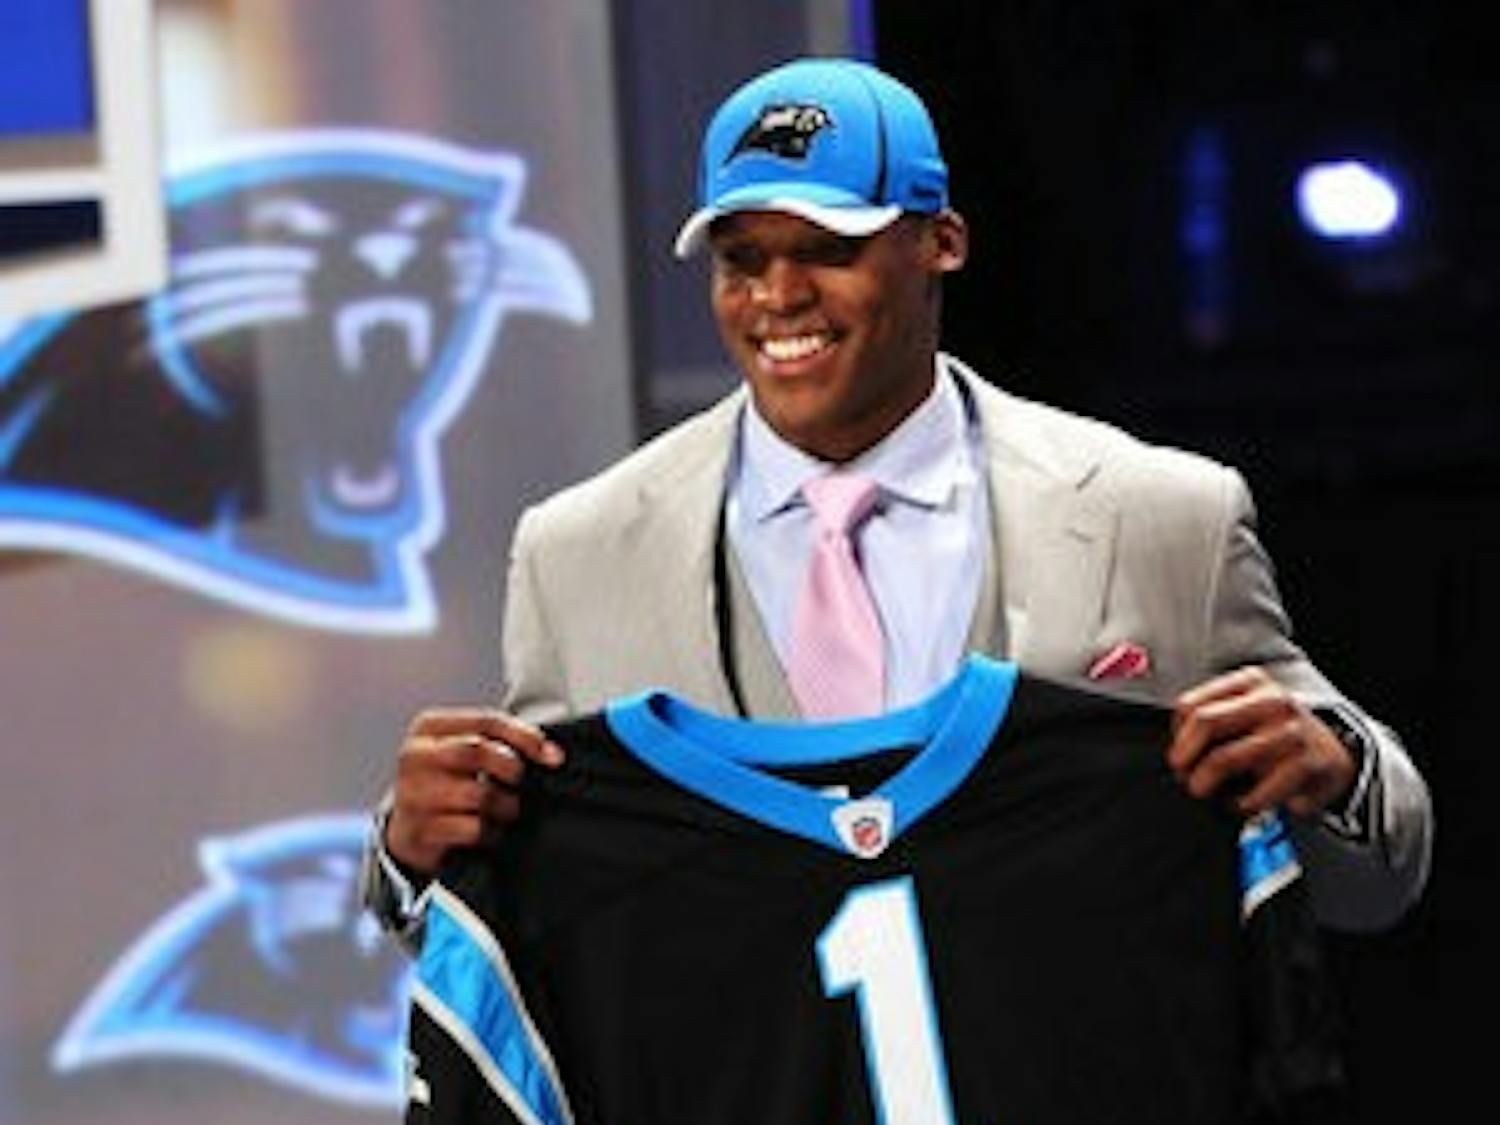 Auburn's Cam Newton poses with a Carolina Pathers jersey after being the number one selection in the 2011 NFL Draft. (Todd Van Emst / Auburn Media Relations)